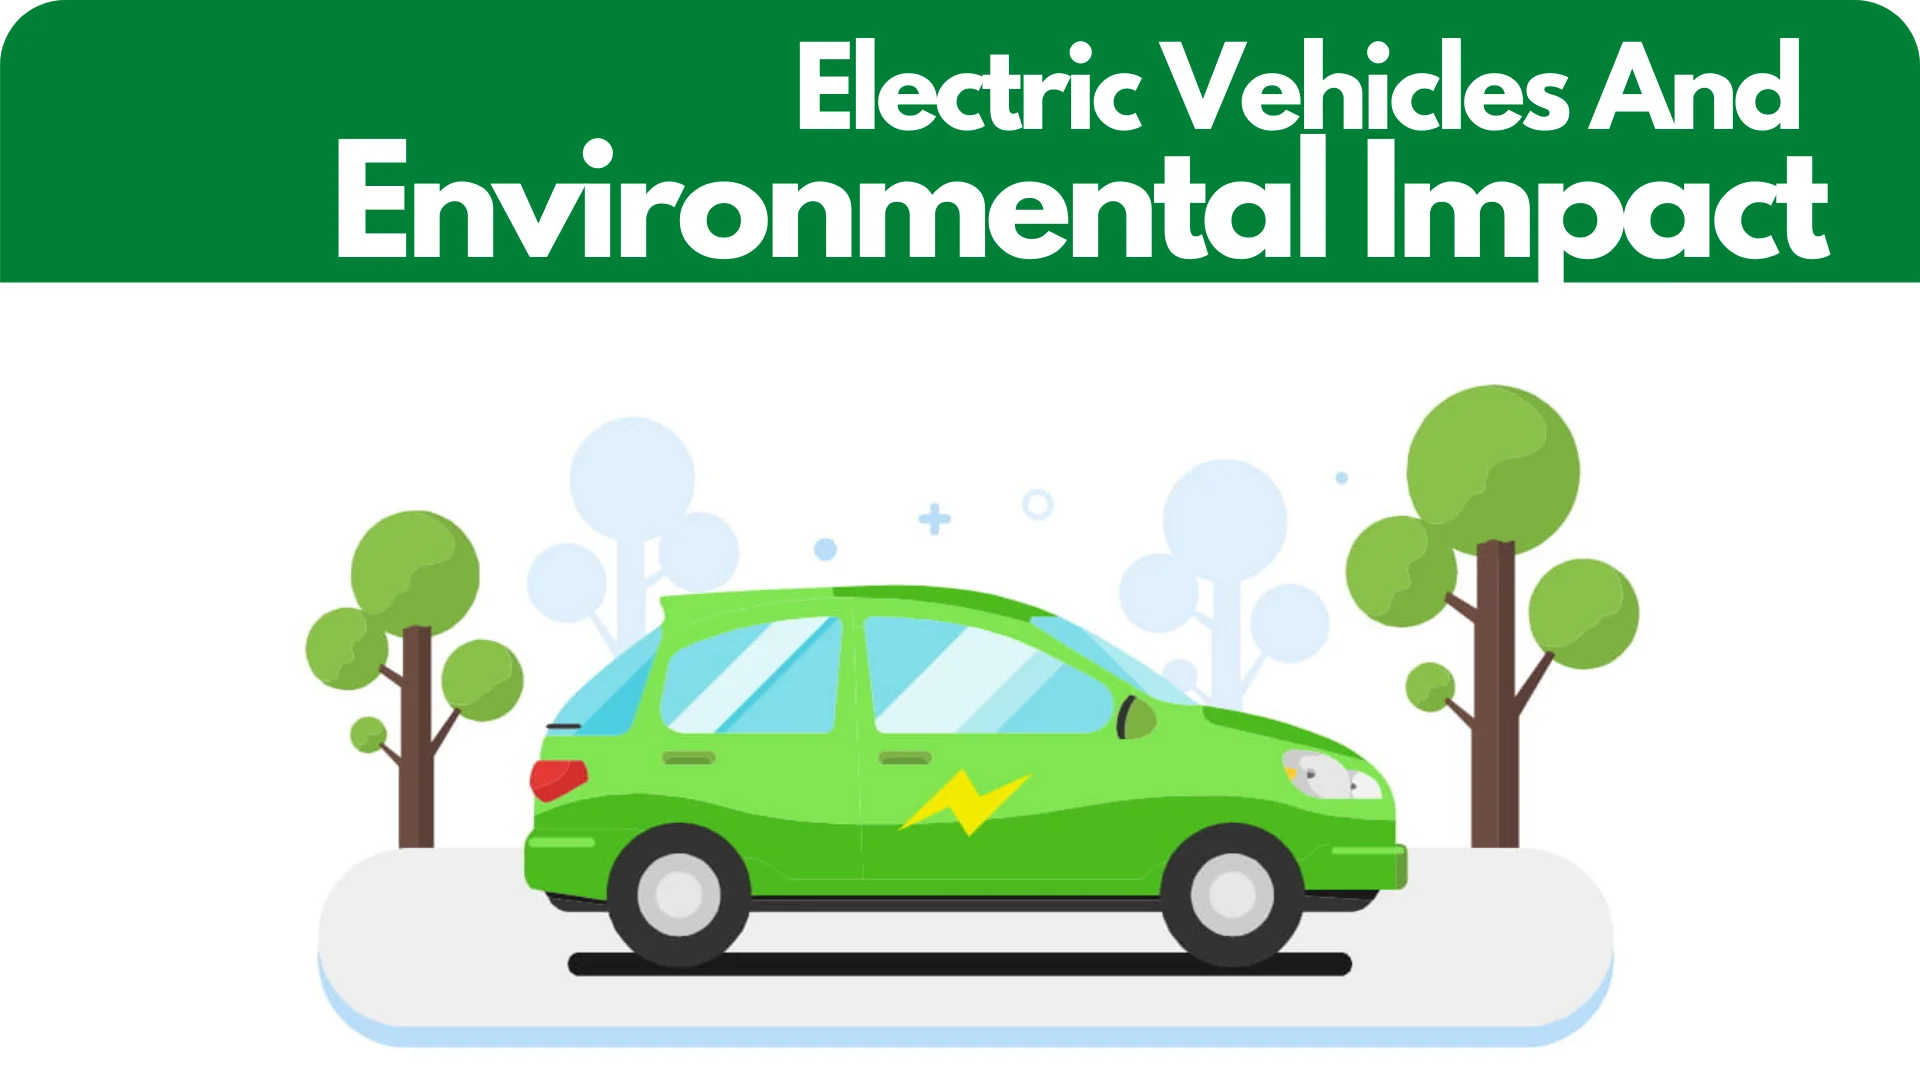 How Electric Vehicles Are Shaping the Future of Sustainable Transportation and the Economy